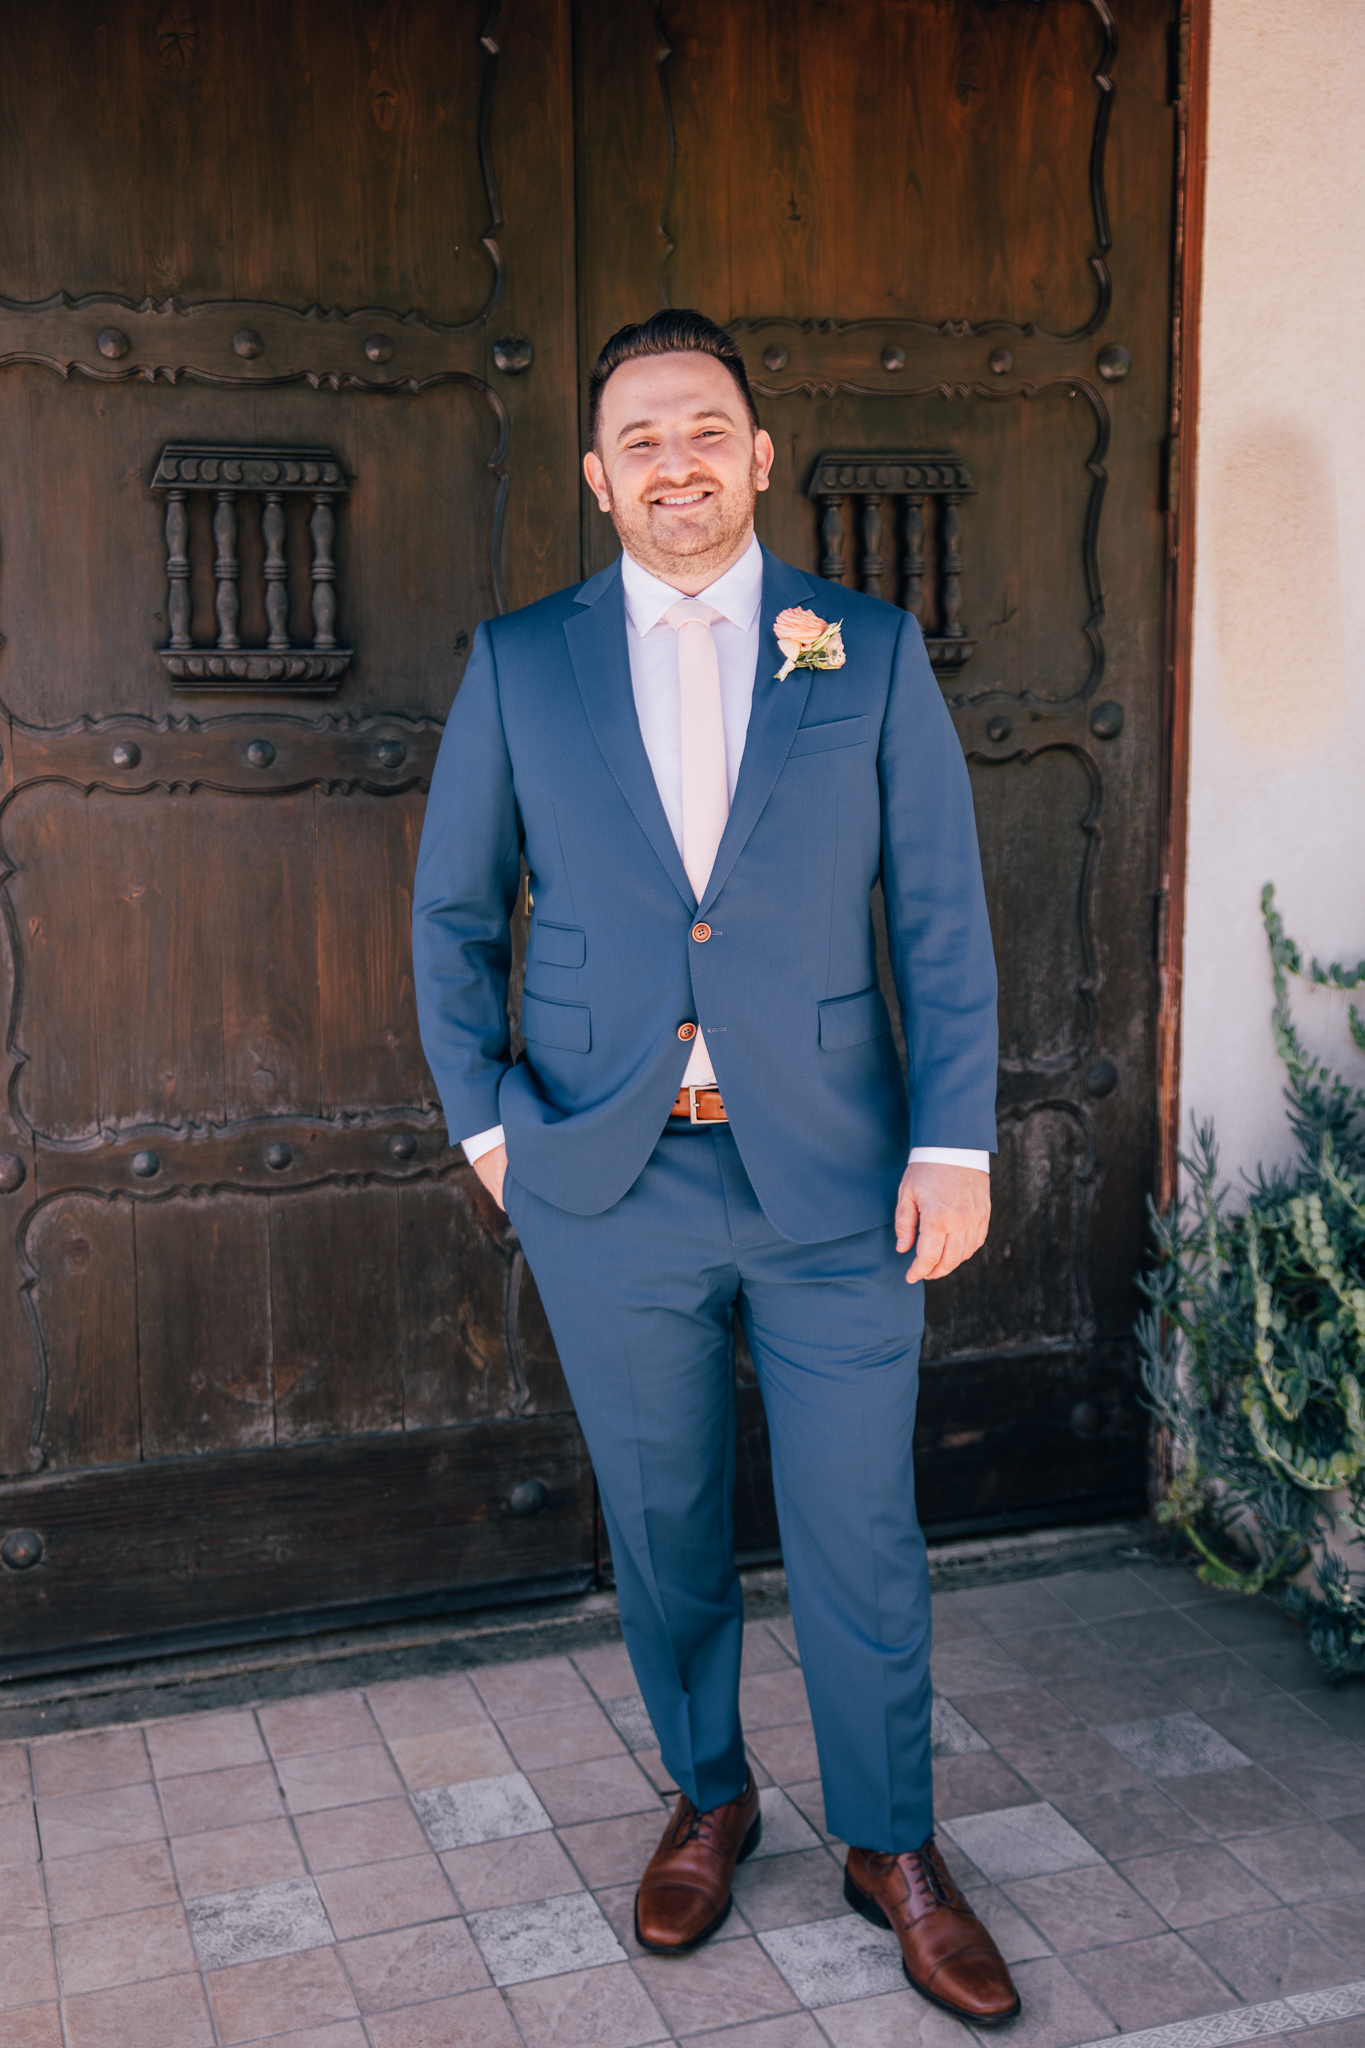 groom wearing blue suit with light pink tie gets ready for wedding